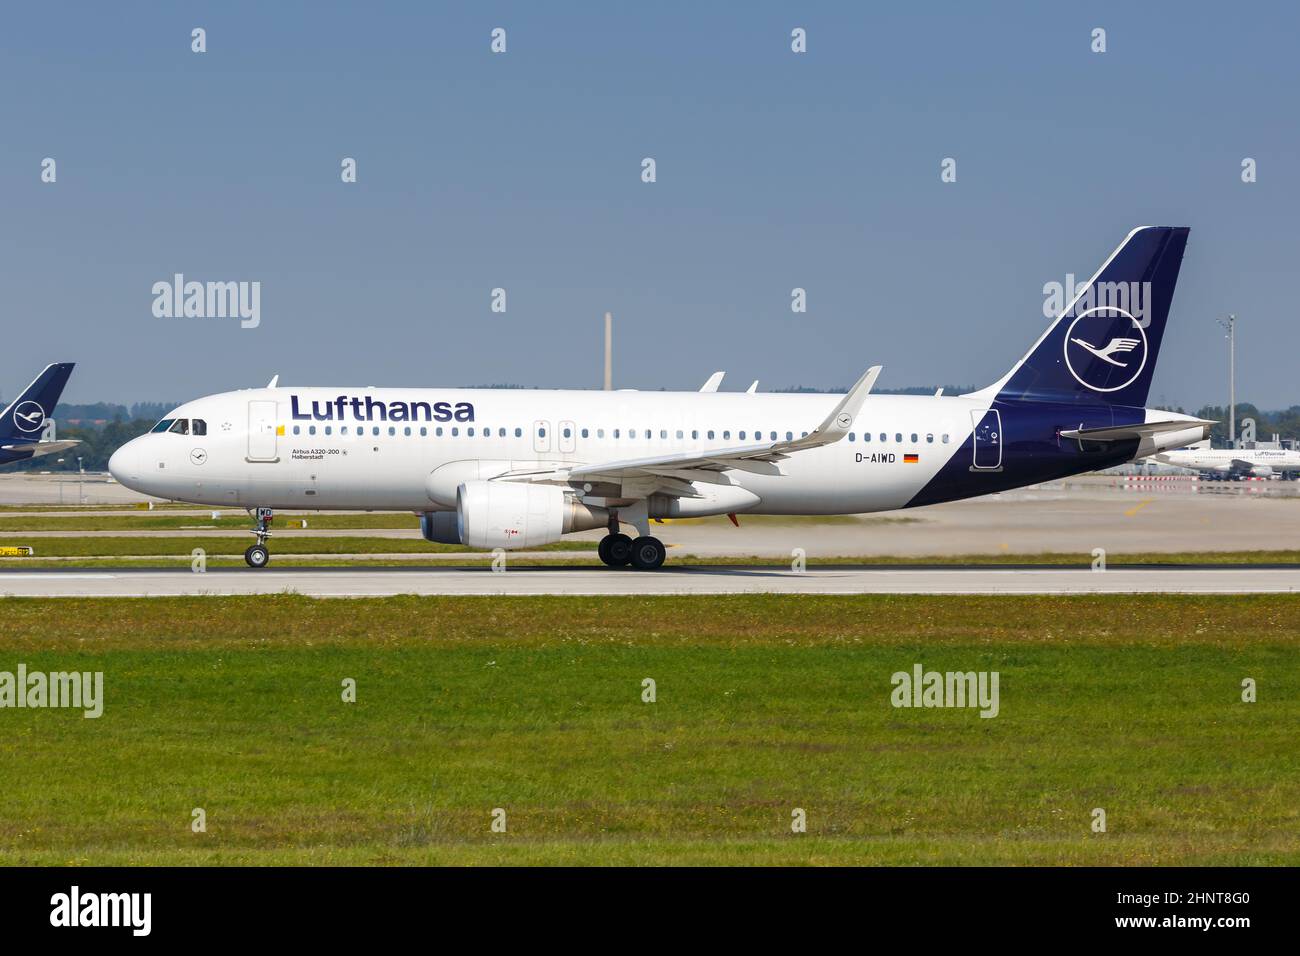 Lufthansa Airbus A320 airplane Munich airport in Germany Stock Photo